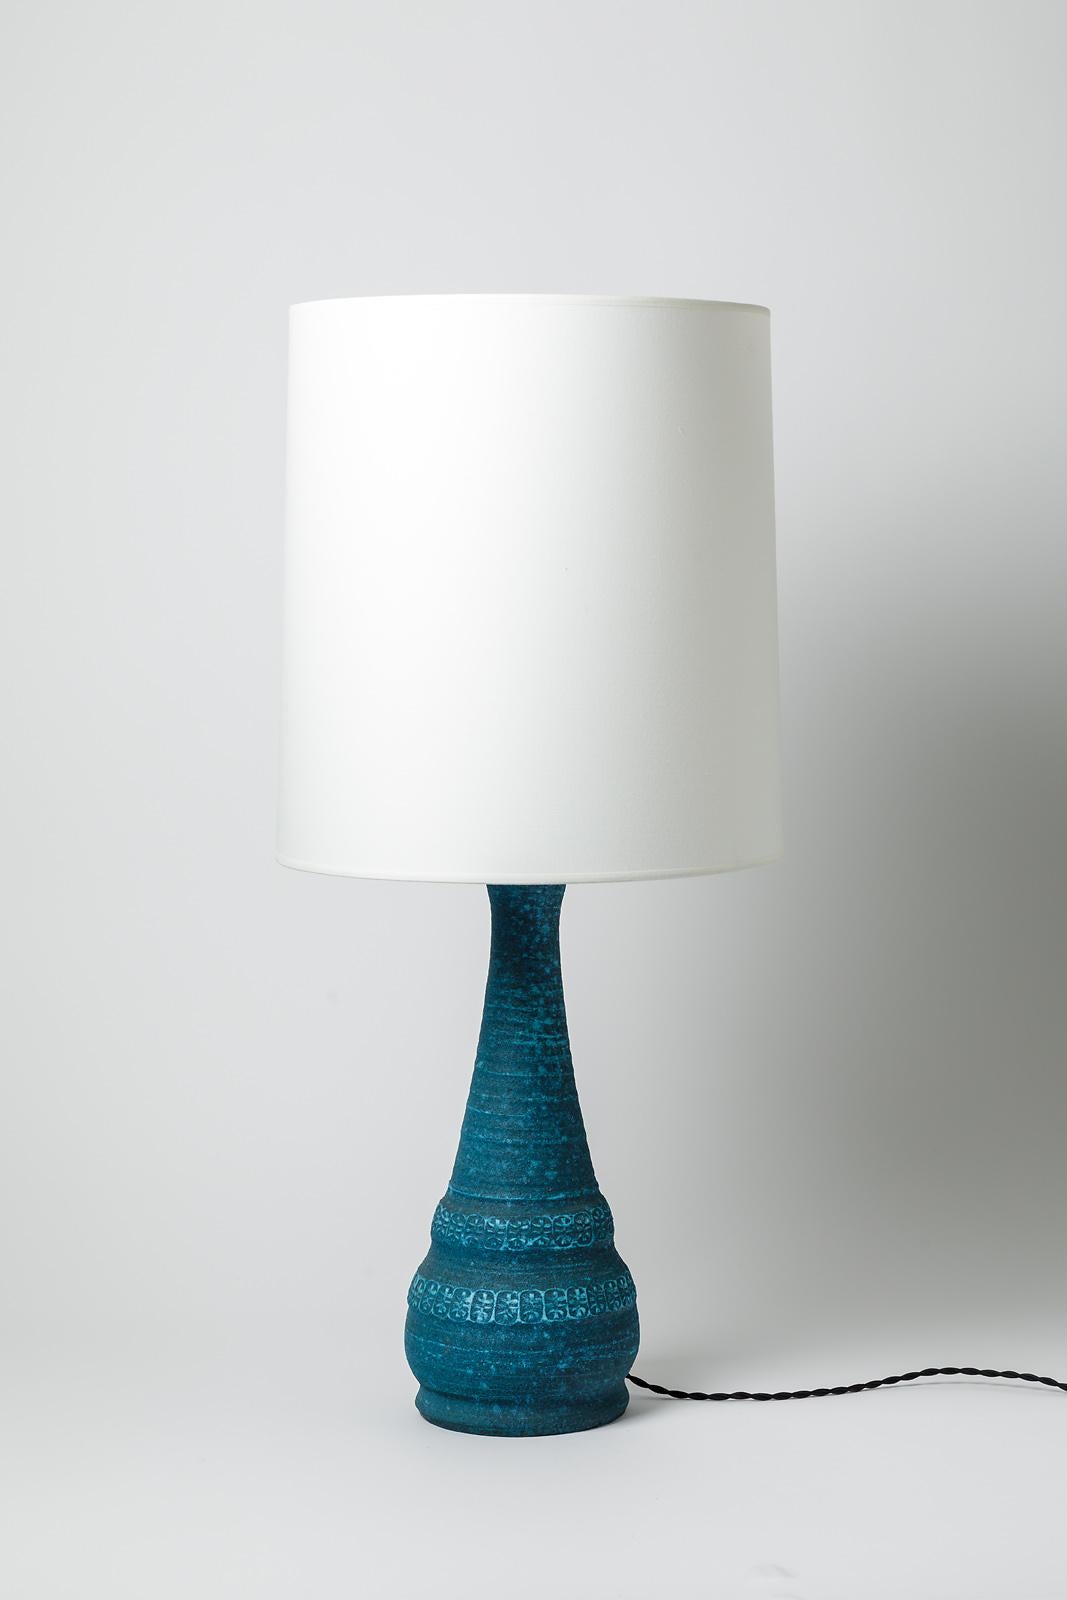 A ceramic table lamp with blue glaze decoration by Accolay Potters.
Sold with a new lamp shaded new european electrical system
Perfect original conditions.
No Signed.
Circa 1960- 1970.
Dimensions :
- Ceramic only : 38,5 x 16 cm / 15' x 6' 1/3